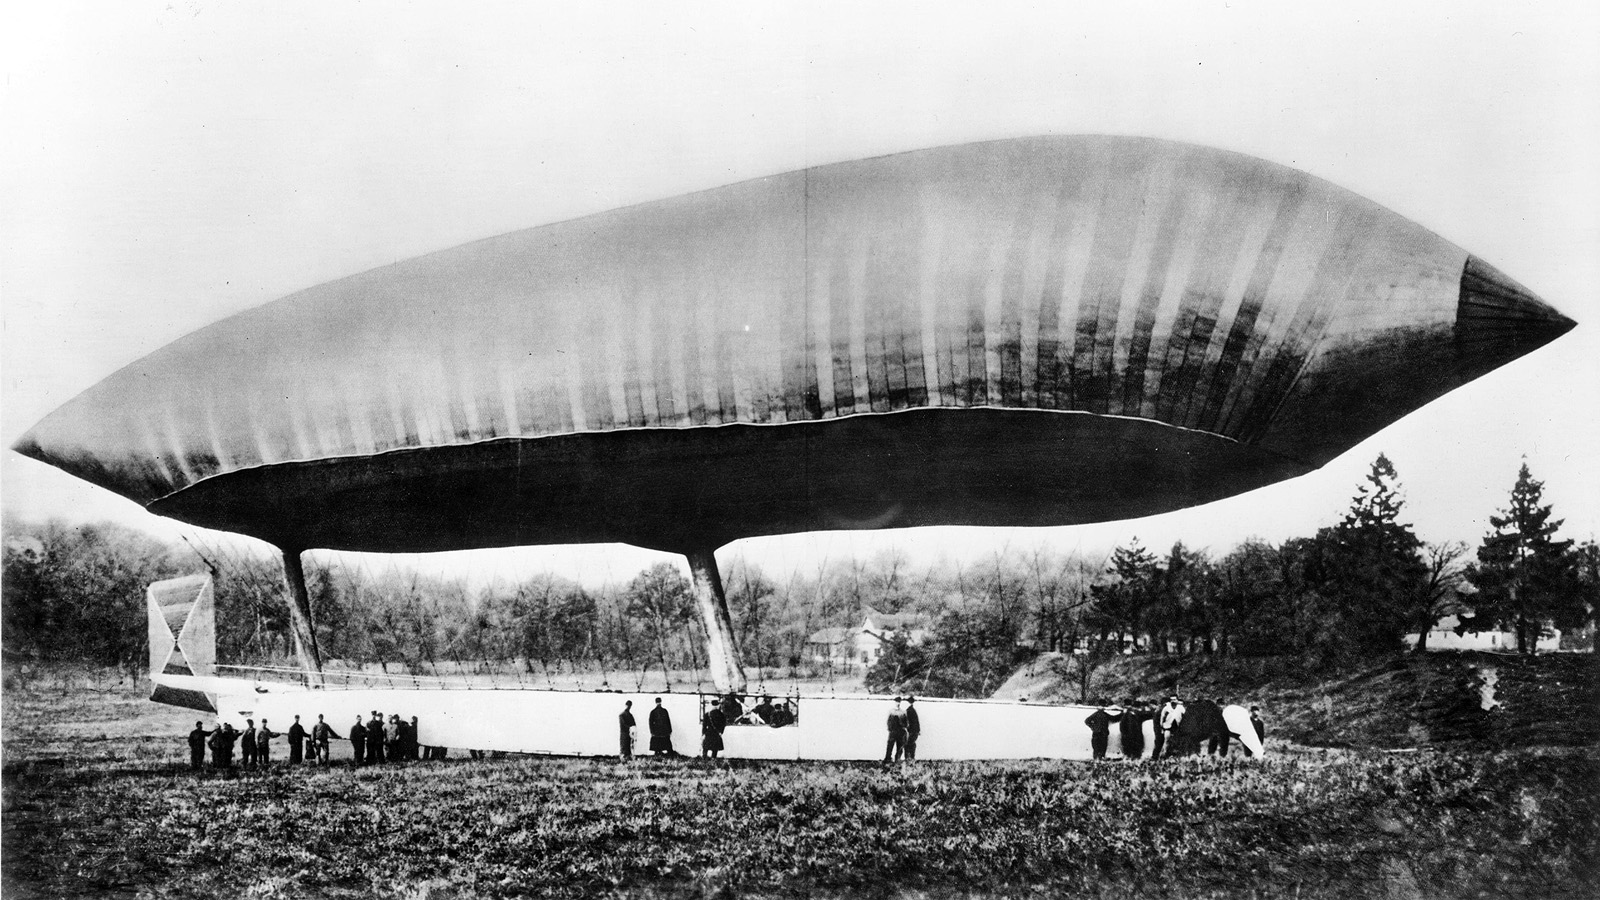 31 Photos From The Golden Age Of Airships, When Zeppelins Ruled The Sky